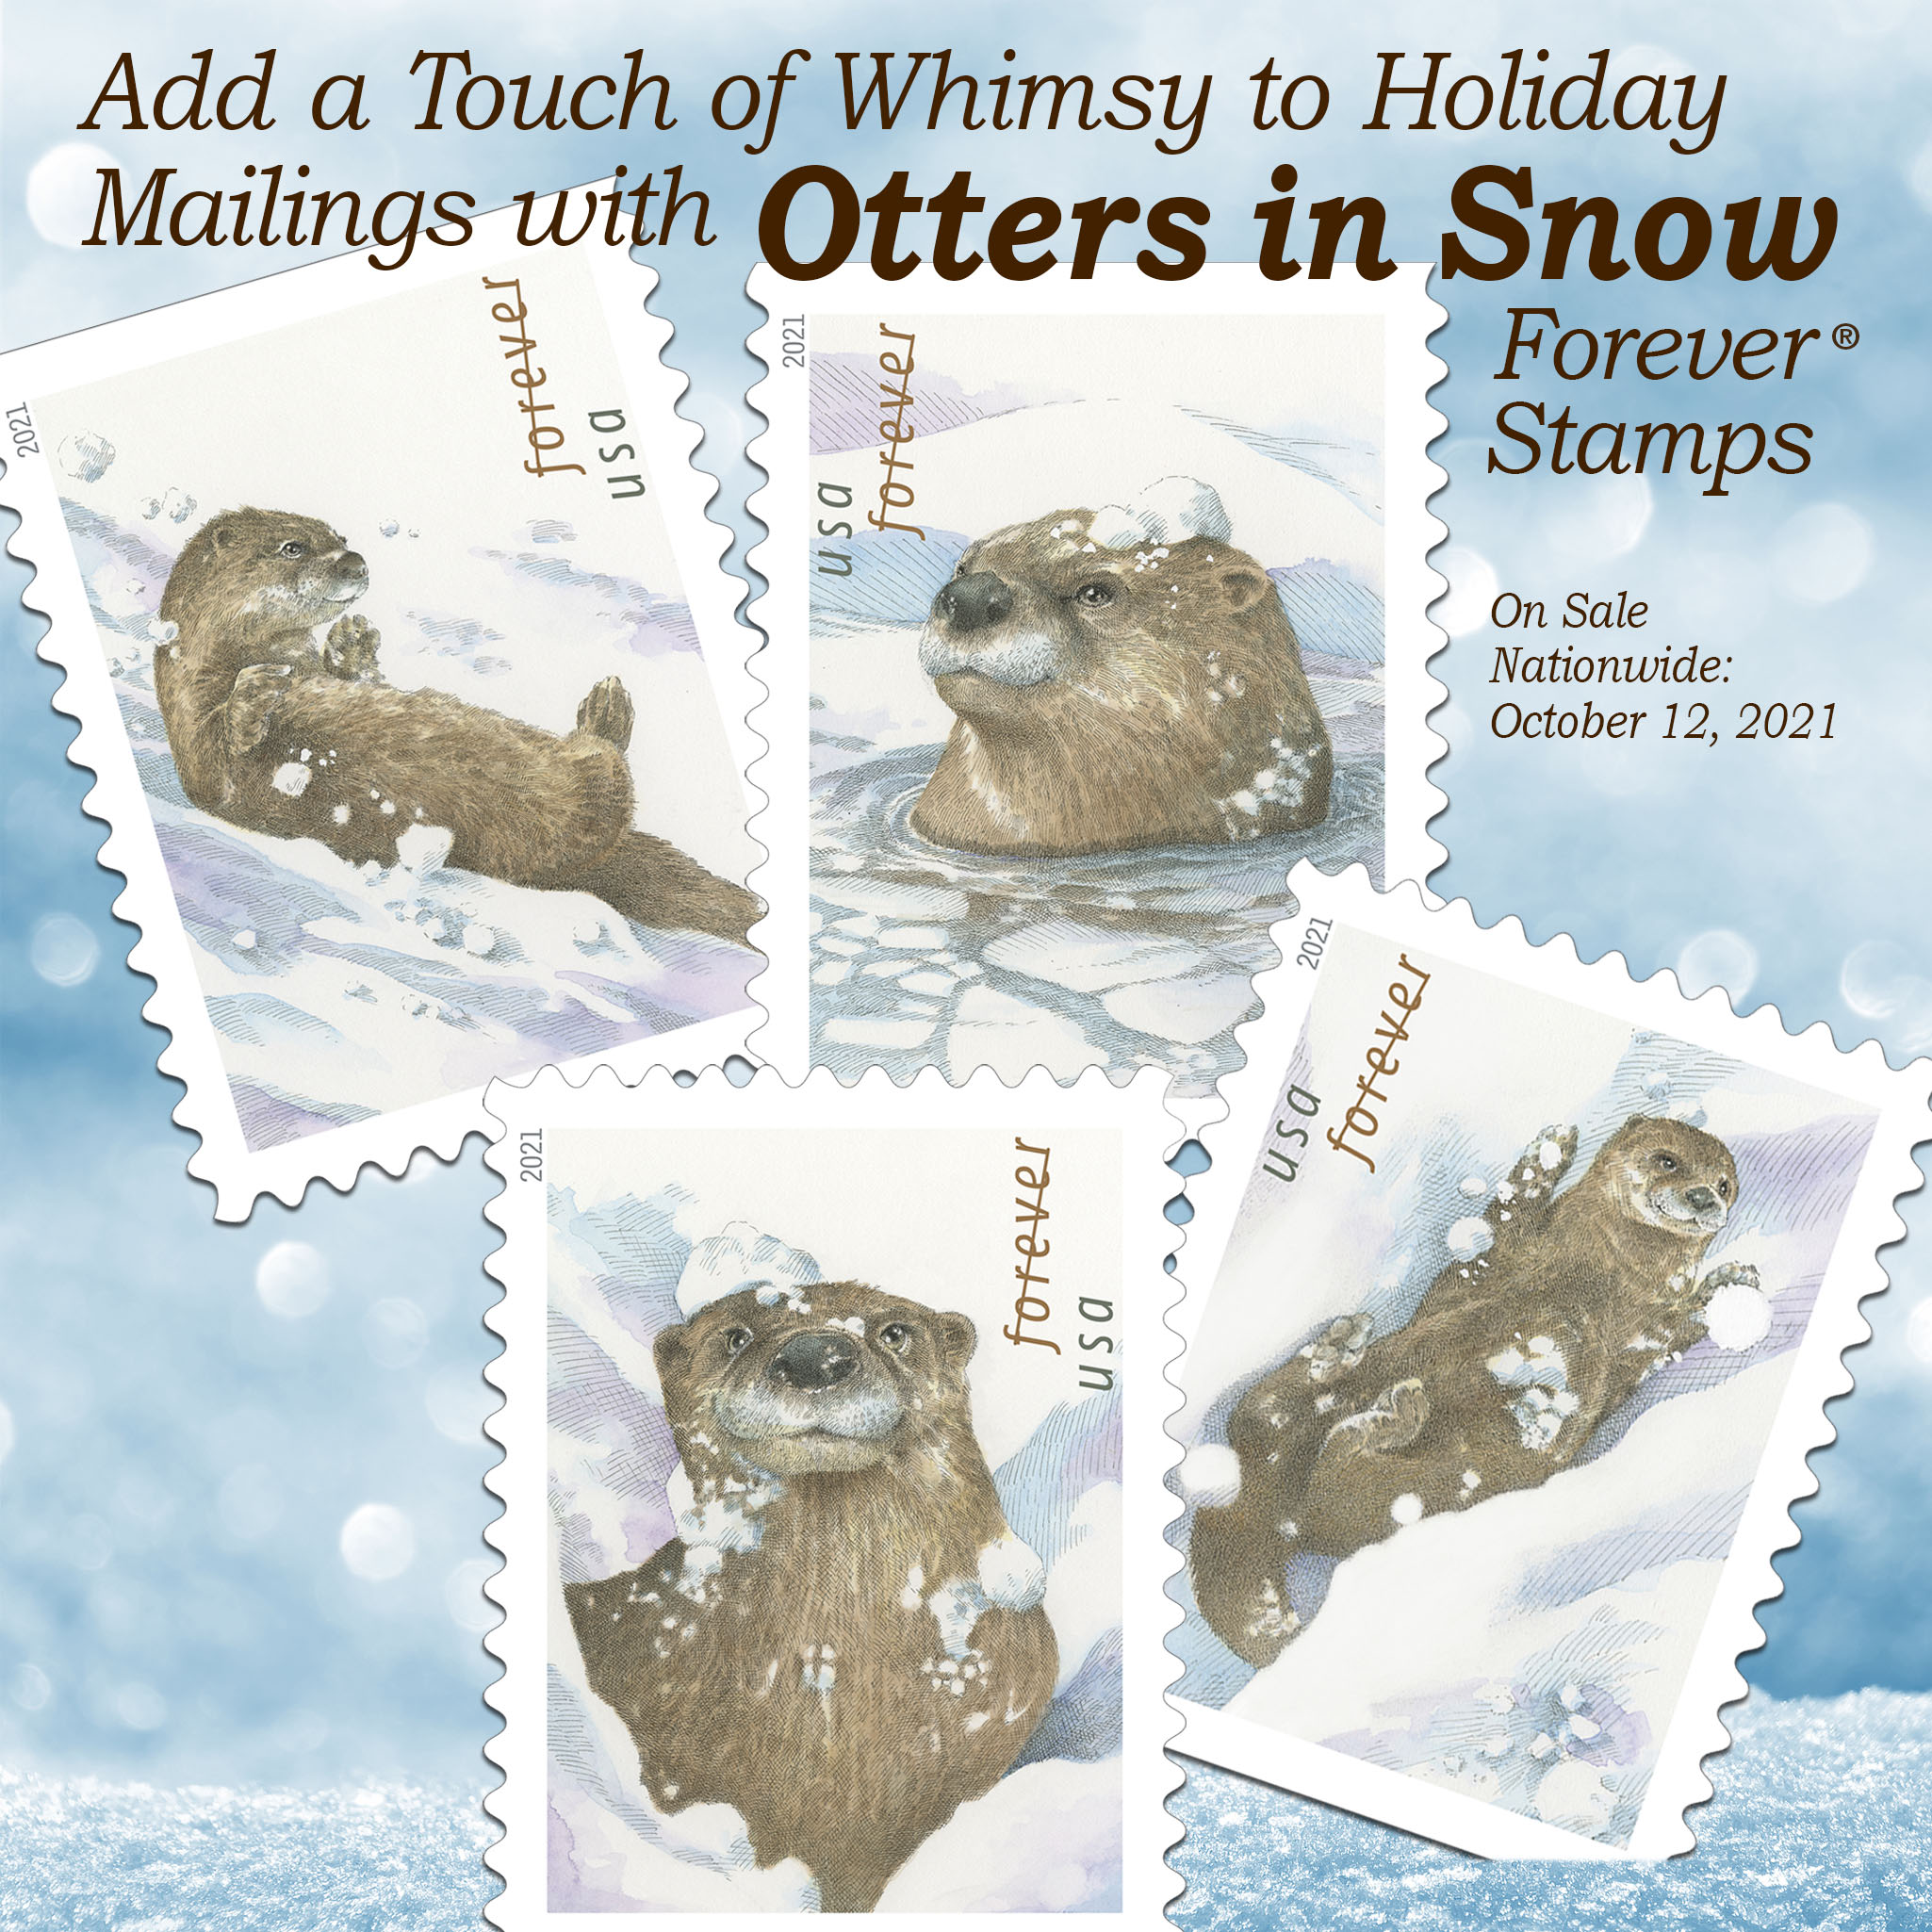 Back cover (Postal Bulletin 22586). December 2, 2021. Add a touch of whimsy to holiday mailings with Otters in Snow Forever Stamps. On sale nationwide: October 12, 2021.